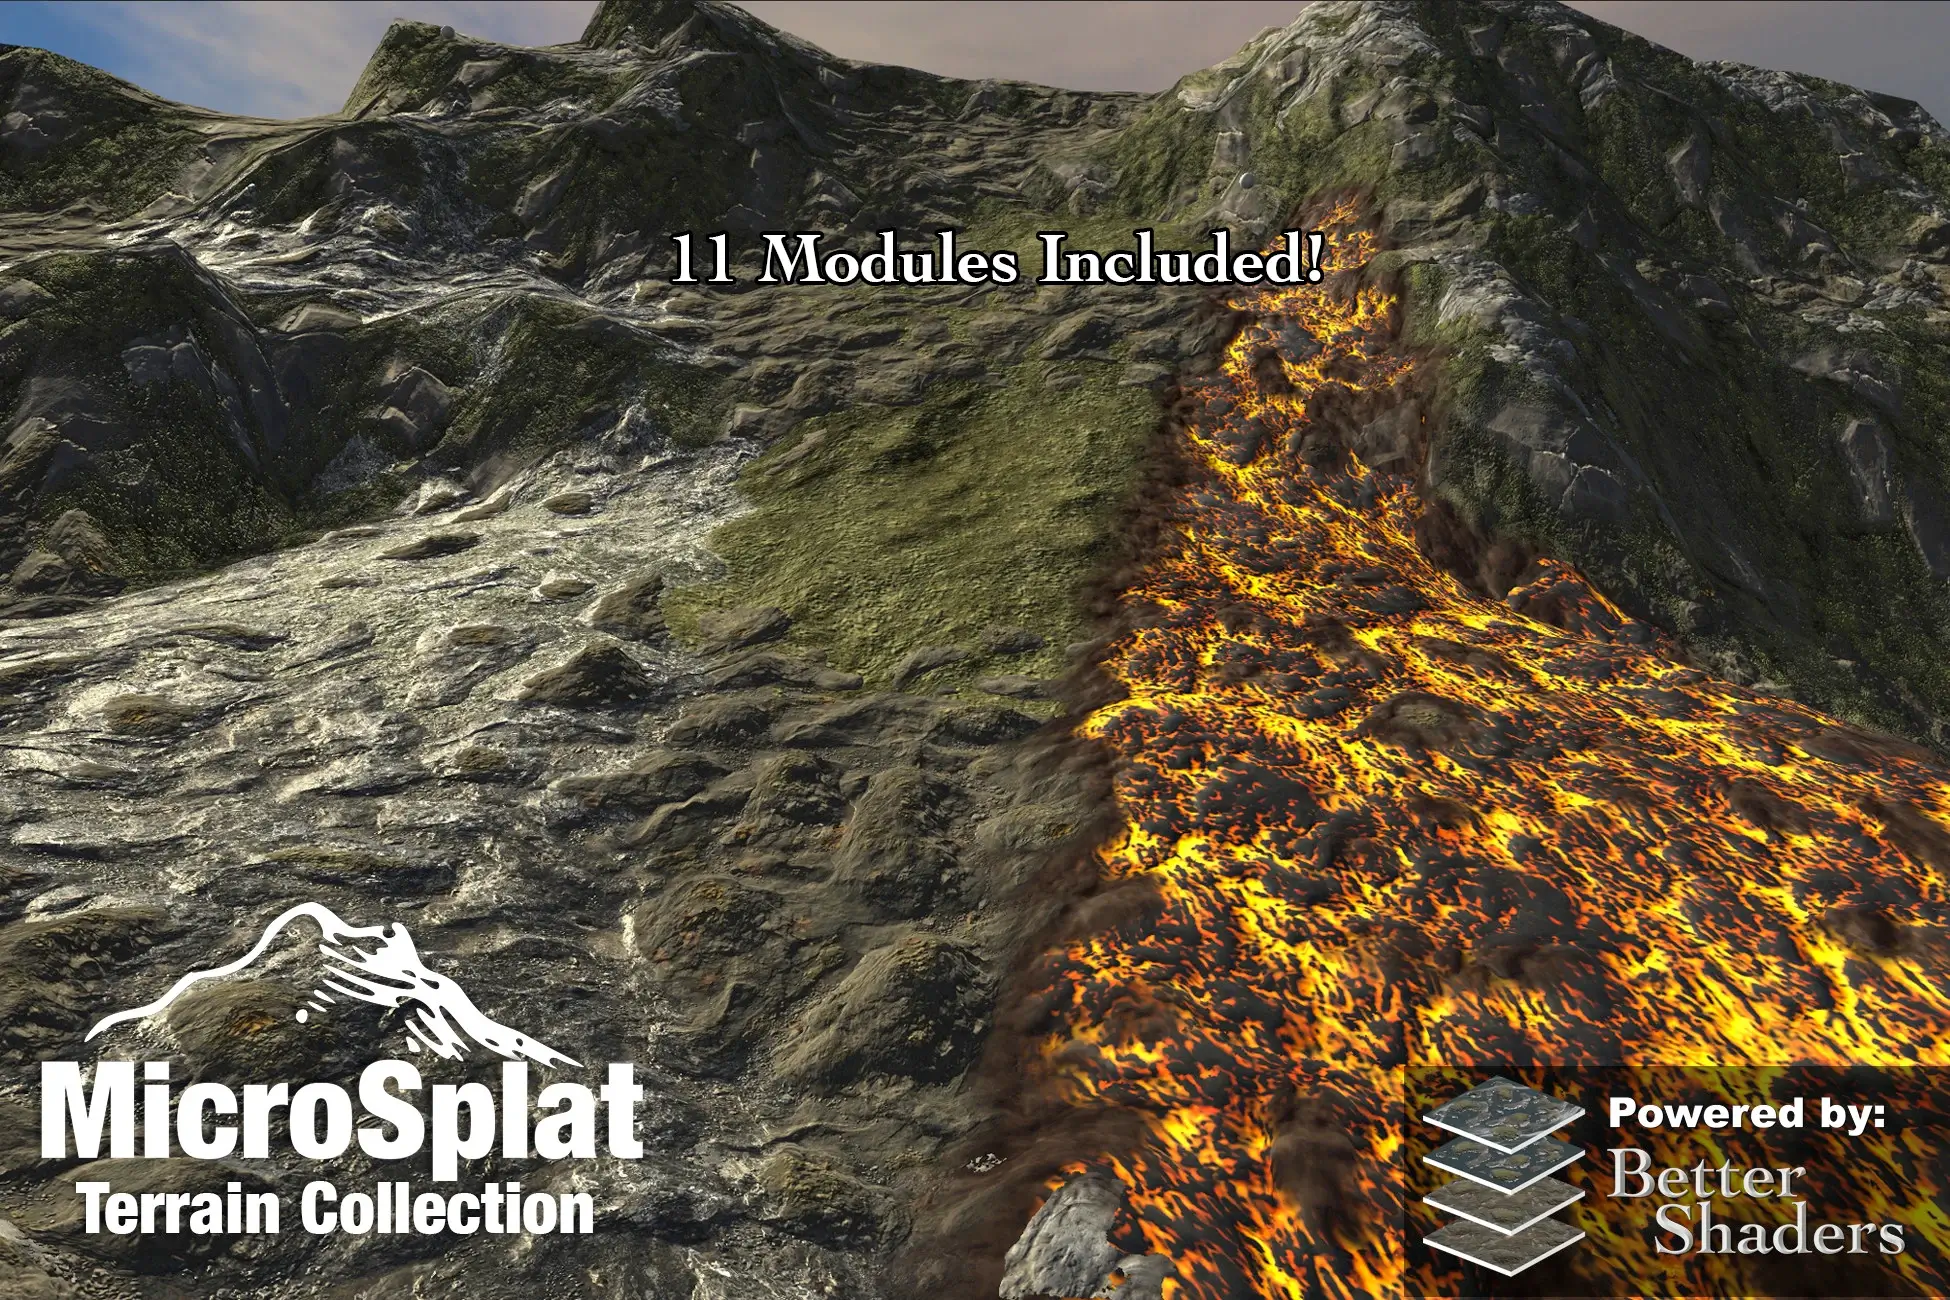 Microsplat terrain collection full nulled asset pack for unity